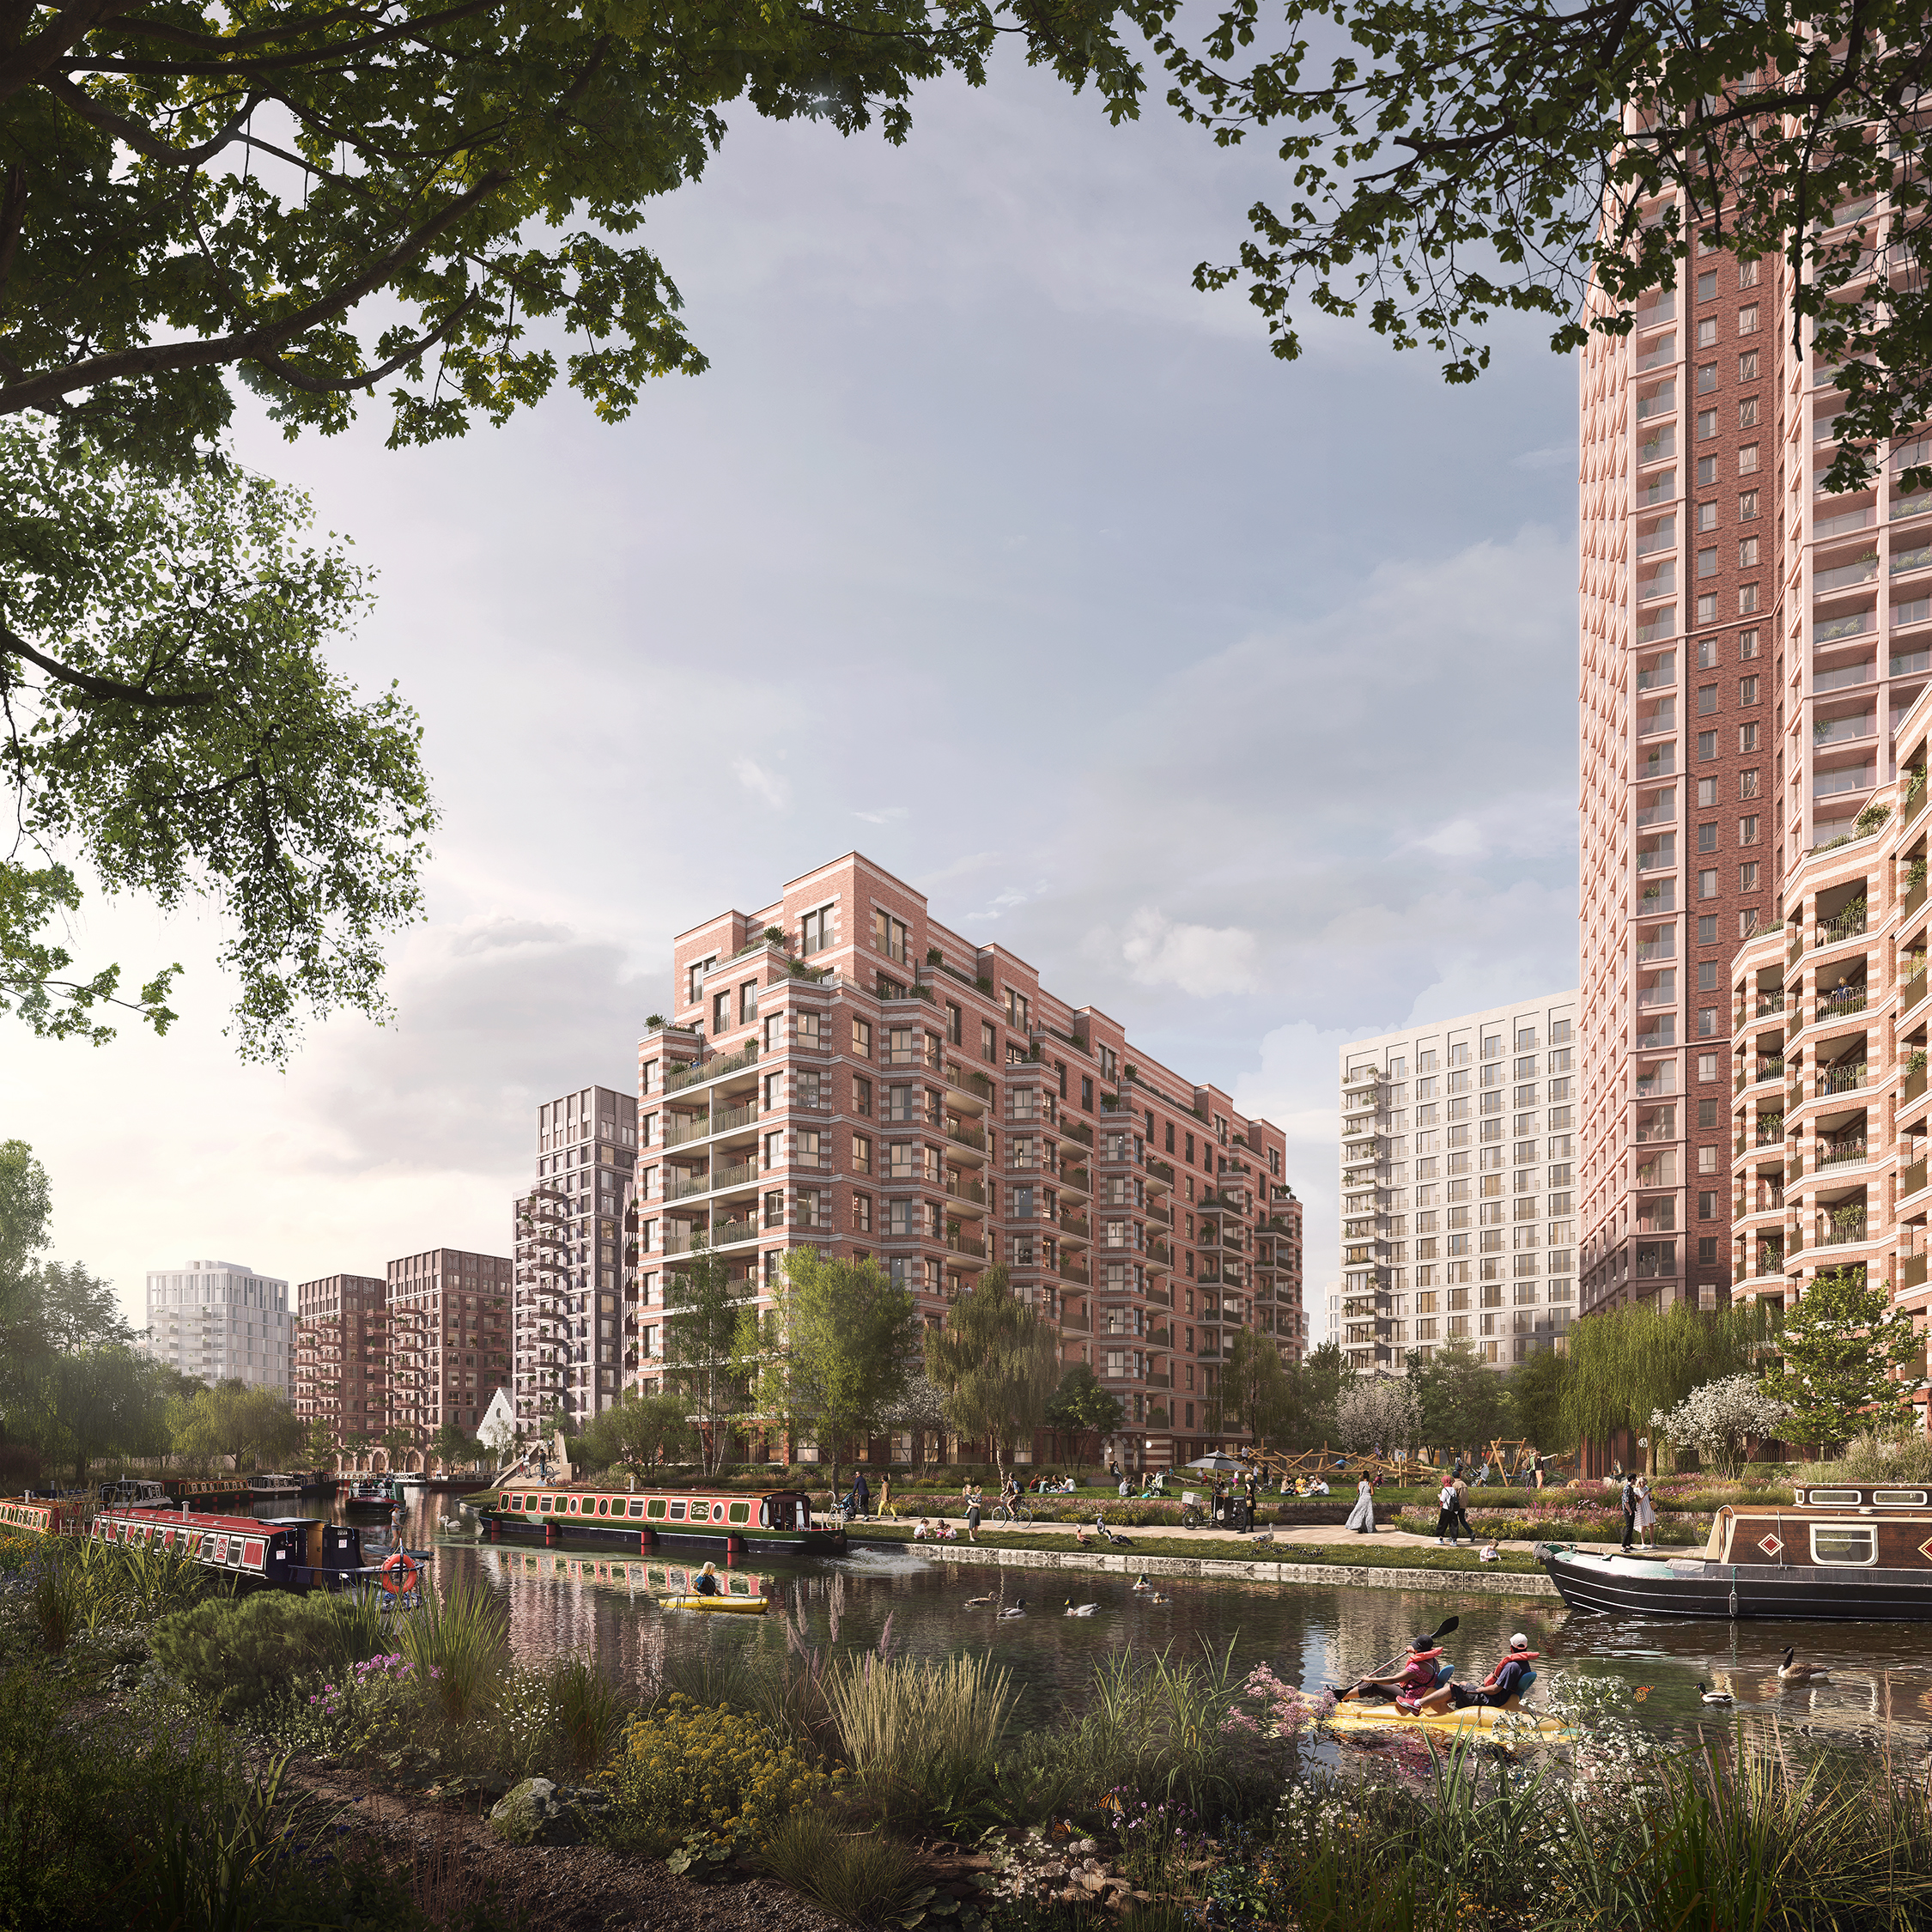 Ballymore and Sainsbury’s joint venture submits plans for major new canalside neighbourhood in Ladbroke Grove